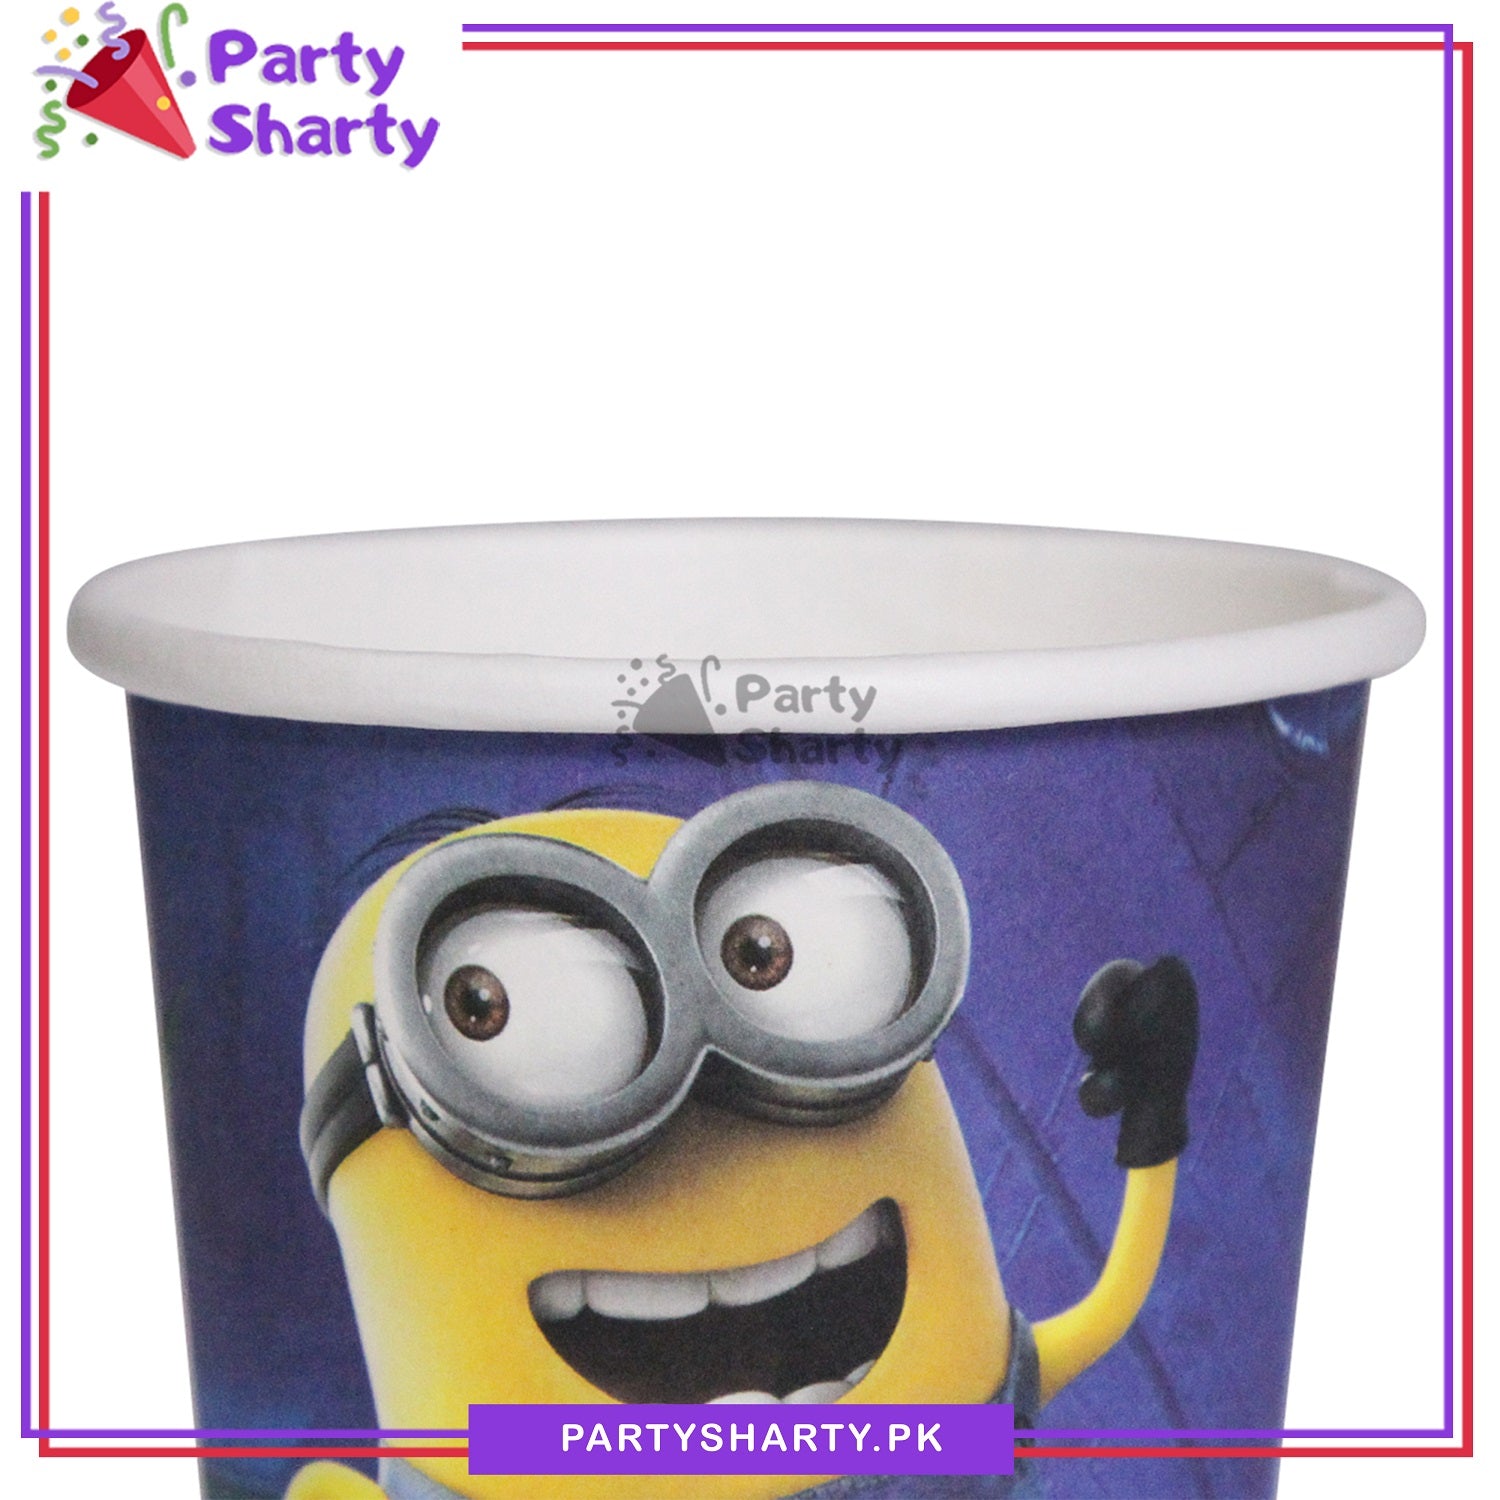 Minion Theme Birthday Party Paper Cups / Glass For Themed Based Party Supplies and Decorations